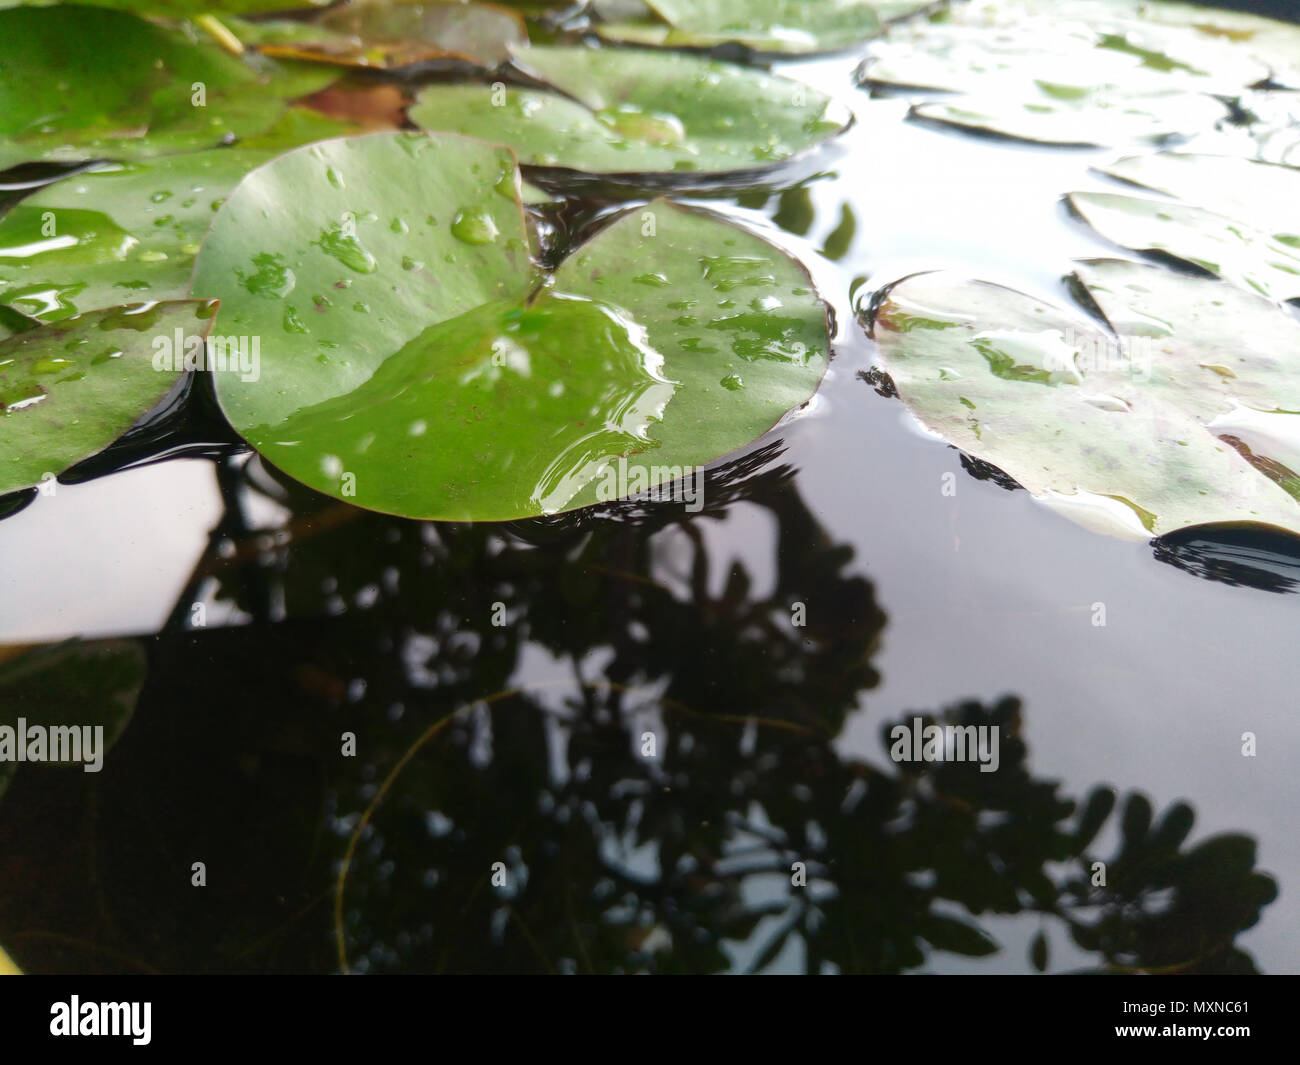 Lotus leaf float on water in tranquil garden with reflection Drops of water on green lotus leaf green. Stock Photo